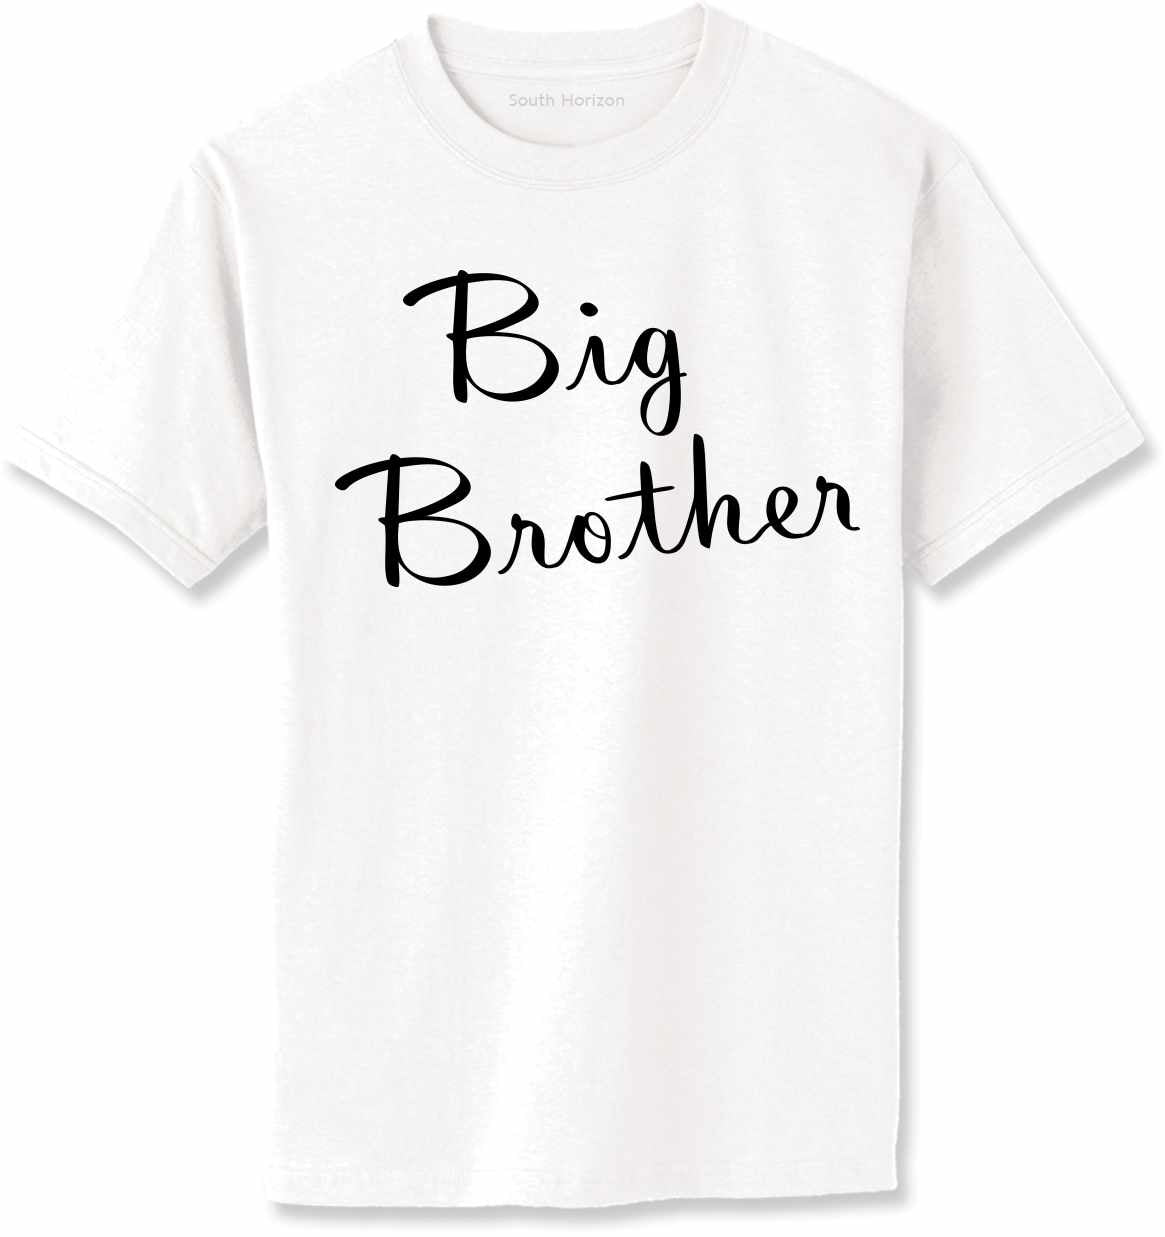 Big Brother on Adult T-Shirt (#1266-1)